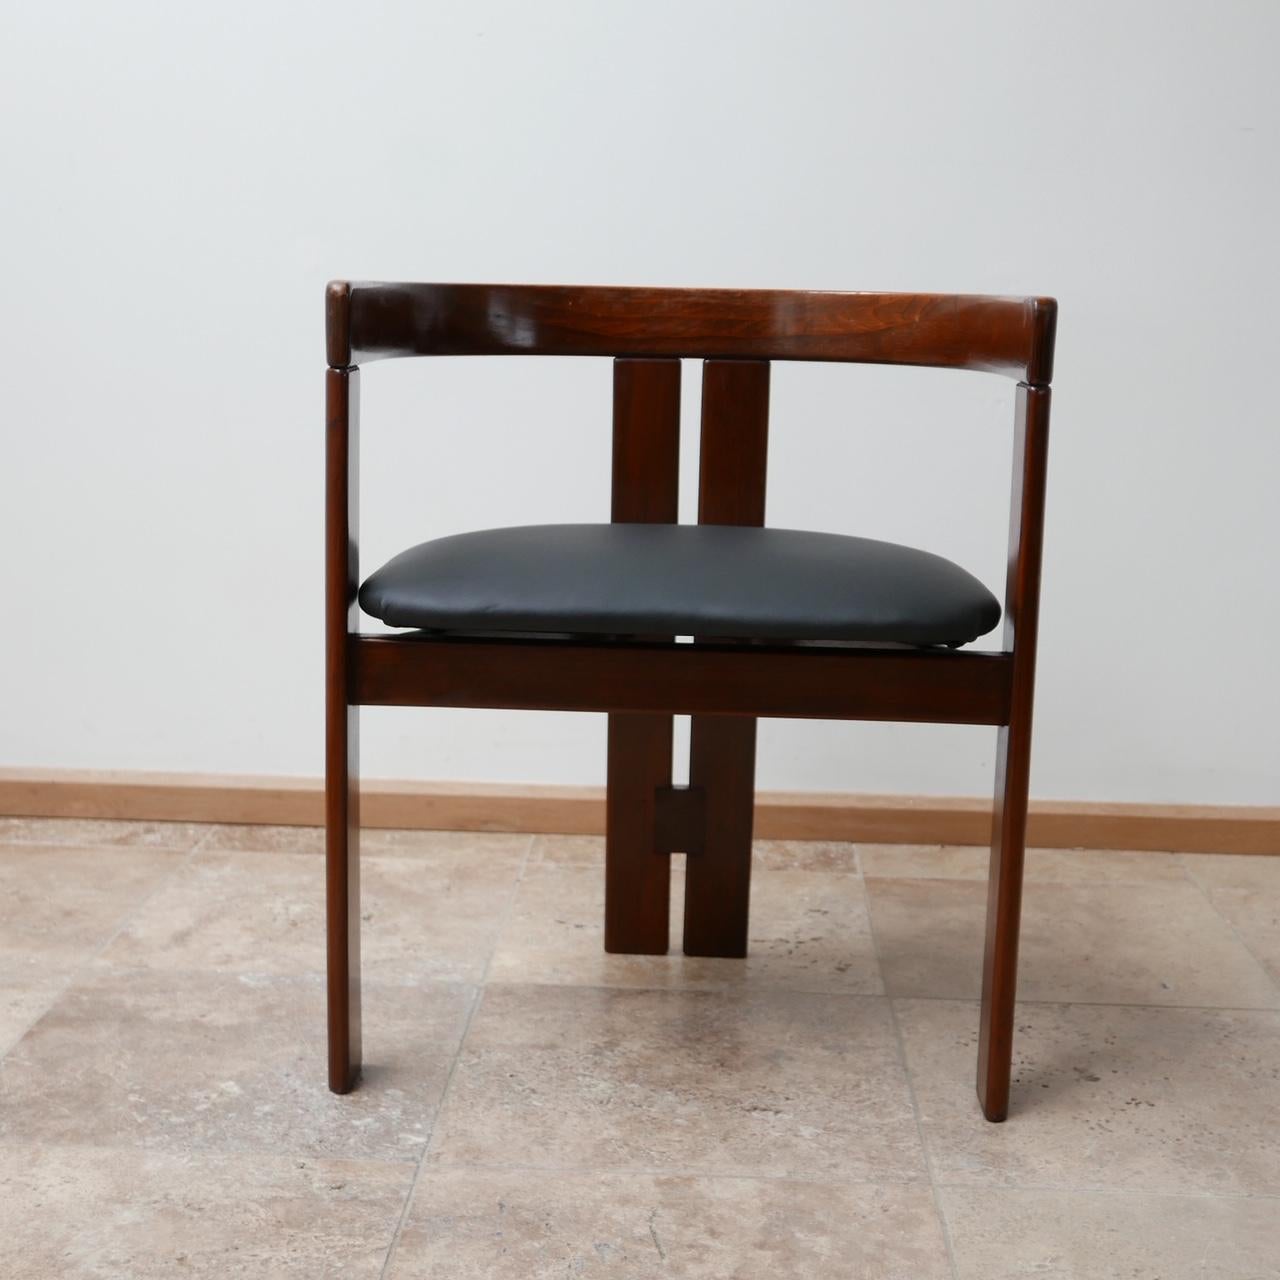 'Pigreco' Italian Midcentury Dining Chairs Attributed to Tobia Scarpa 3